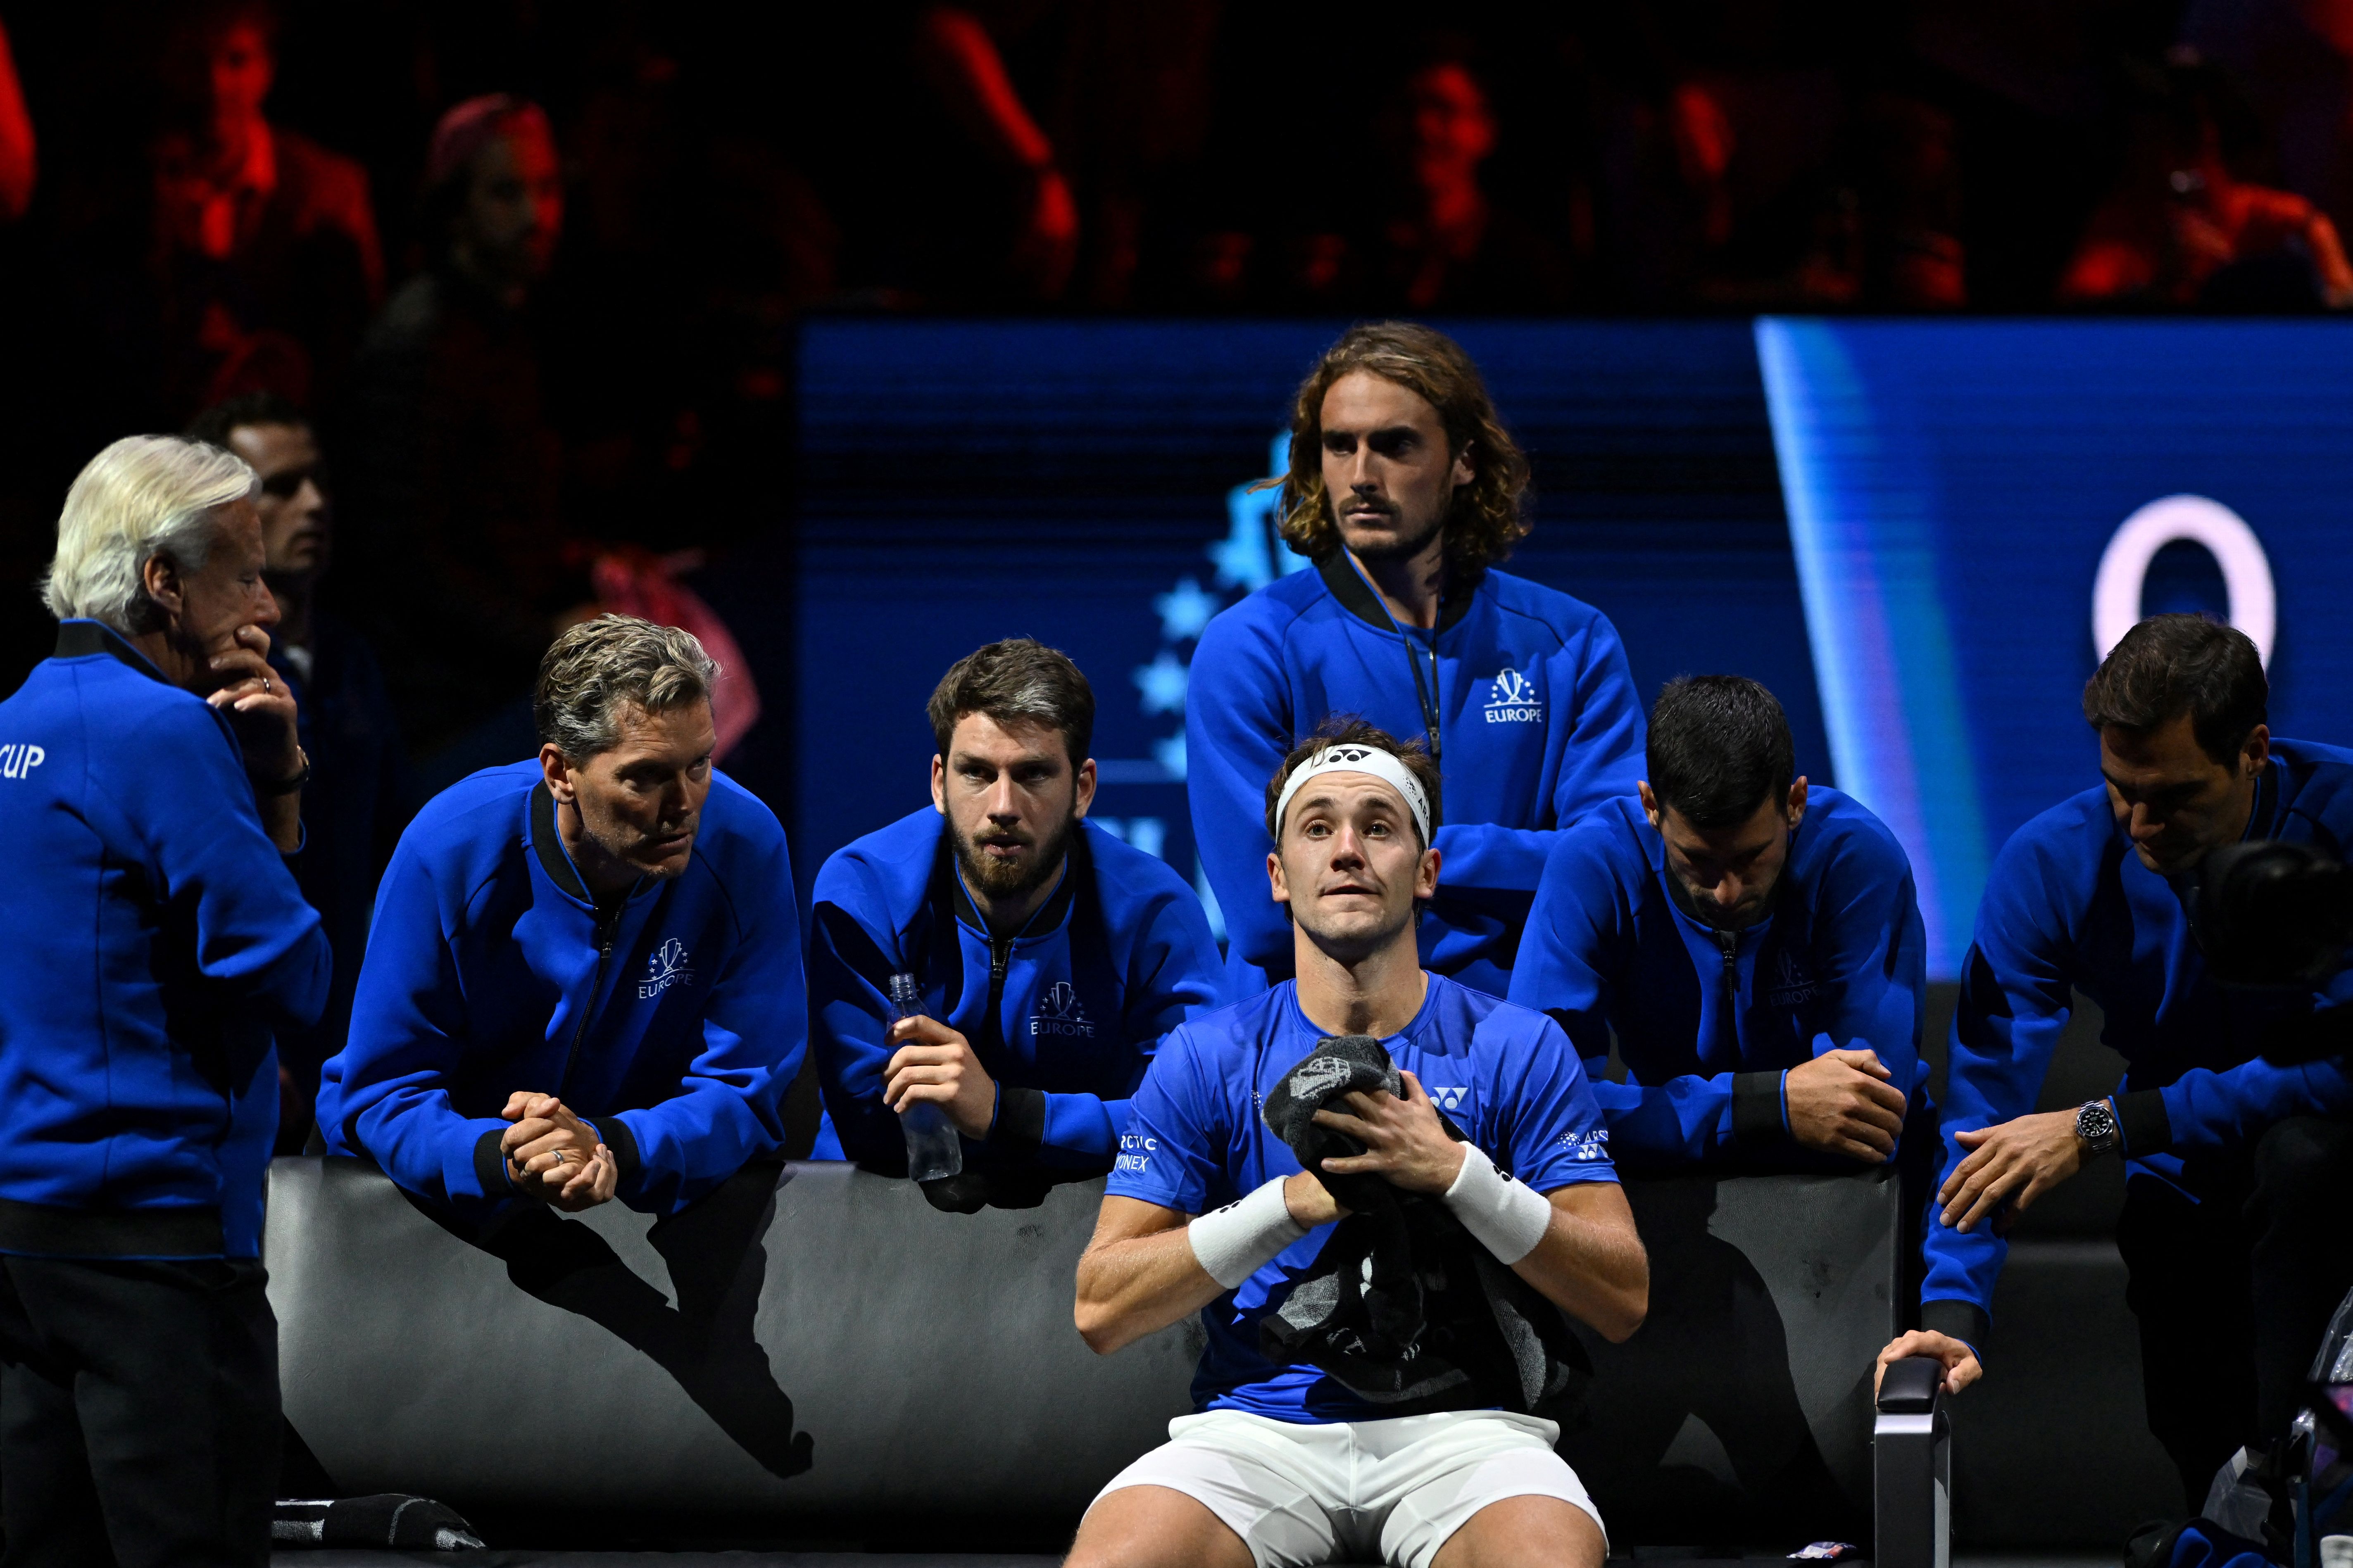 WATCH Casper Ruud struggles with Big 4 inside jokes, shines on court at Laver Cup